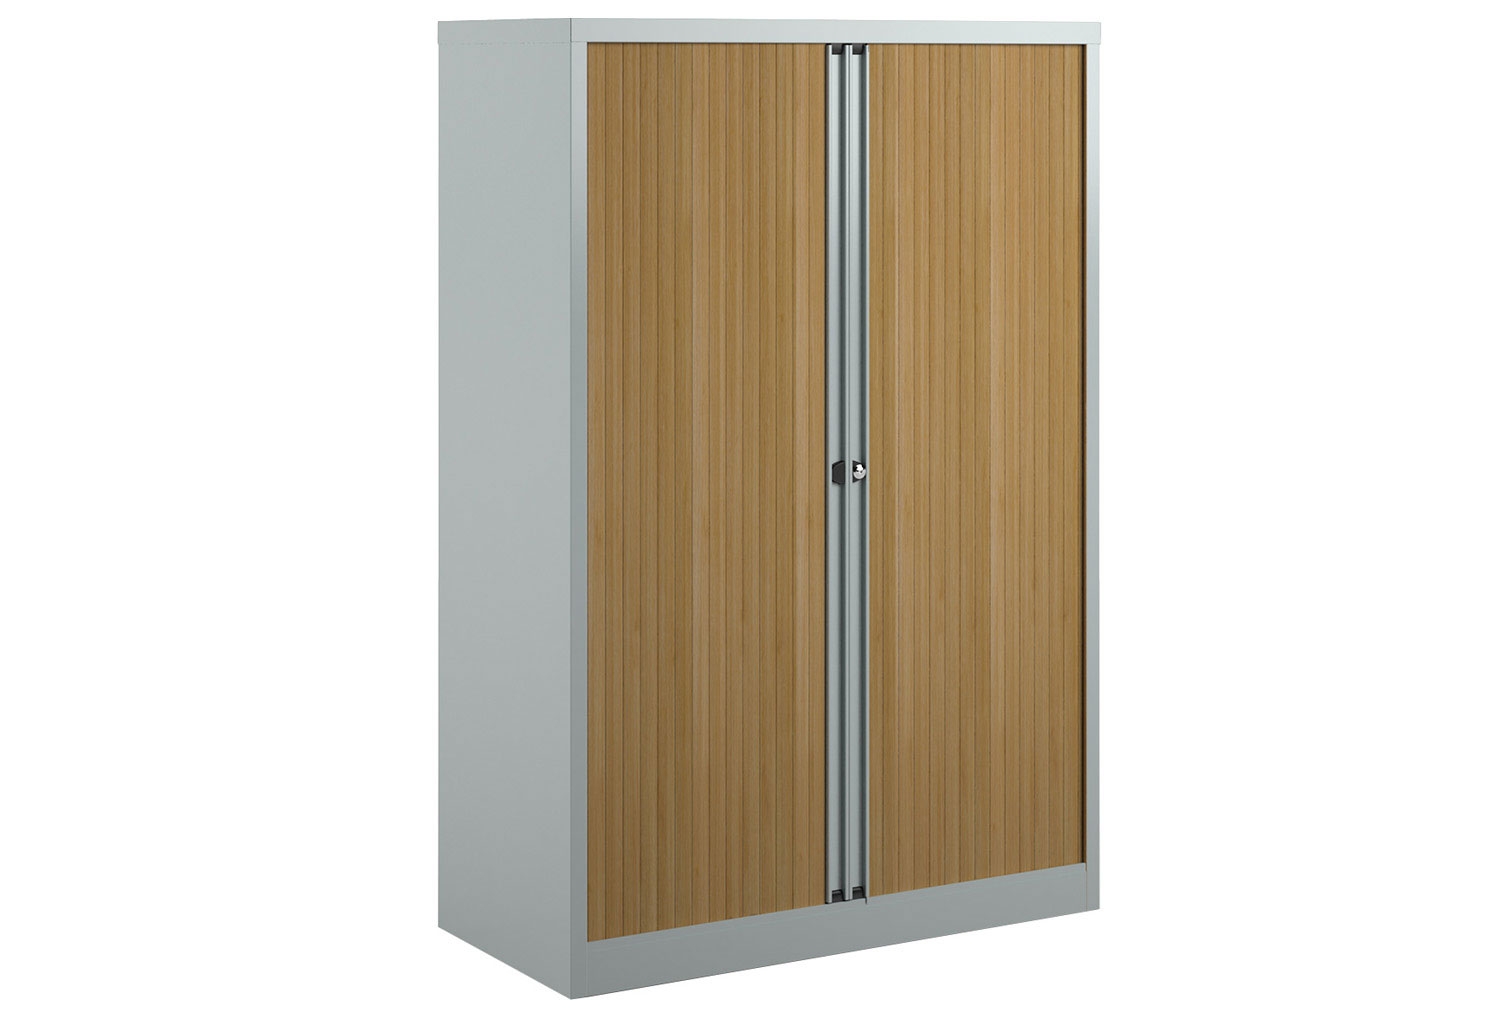 Bisley Economy Tambour Office Cupboards, 100wx47dx159h (cm), Silver / Beech, Fully Installed